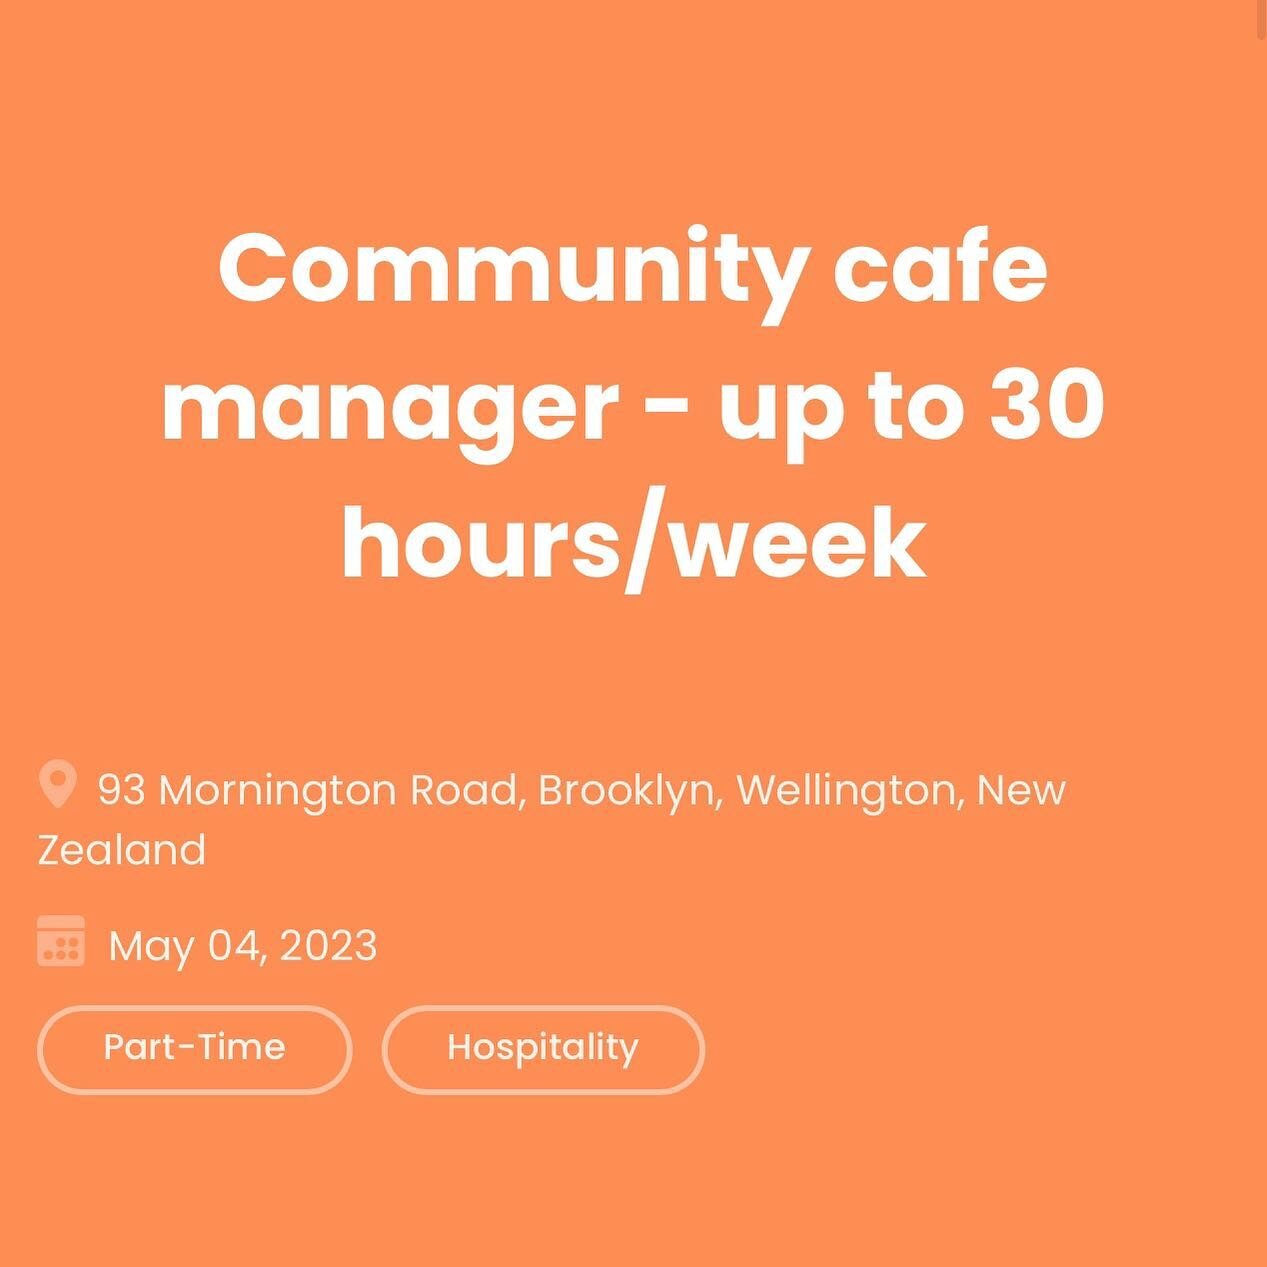 Vogelmorn loves community as much as it loves good coffee. So we're continuing to invest in our cafe to keep VBC daytimes friendly and warm and nourishing.
This position provides an opportunity for someone to bring their creative flair to our communi